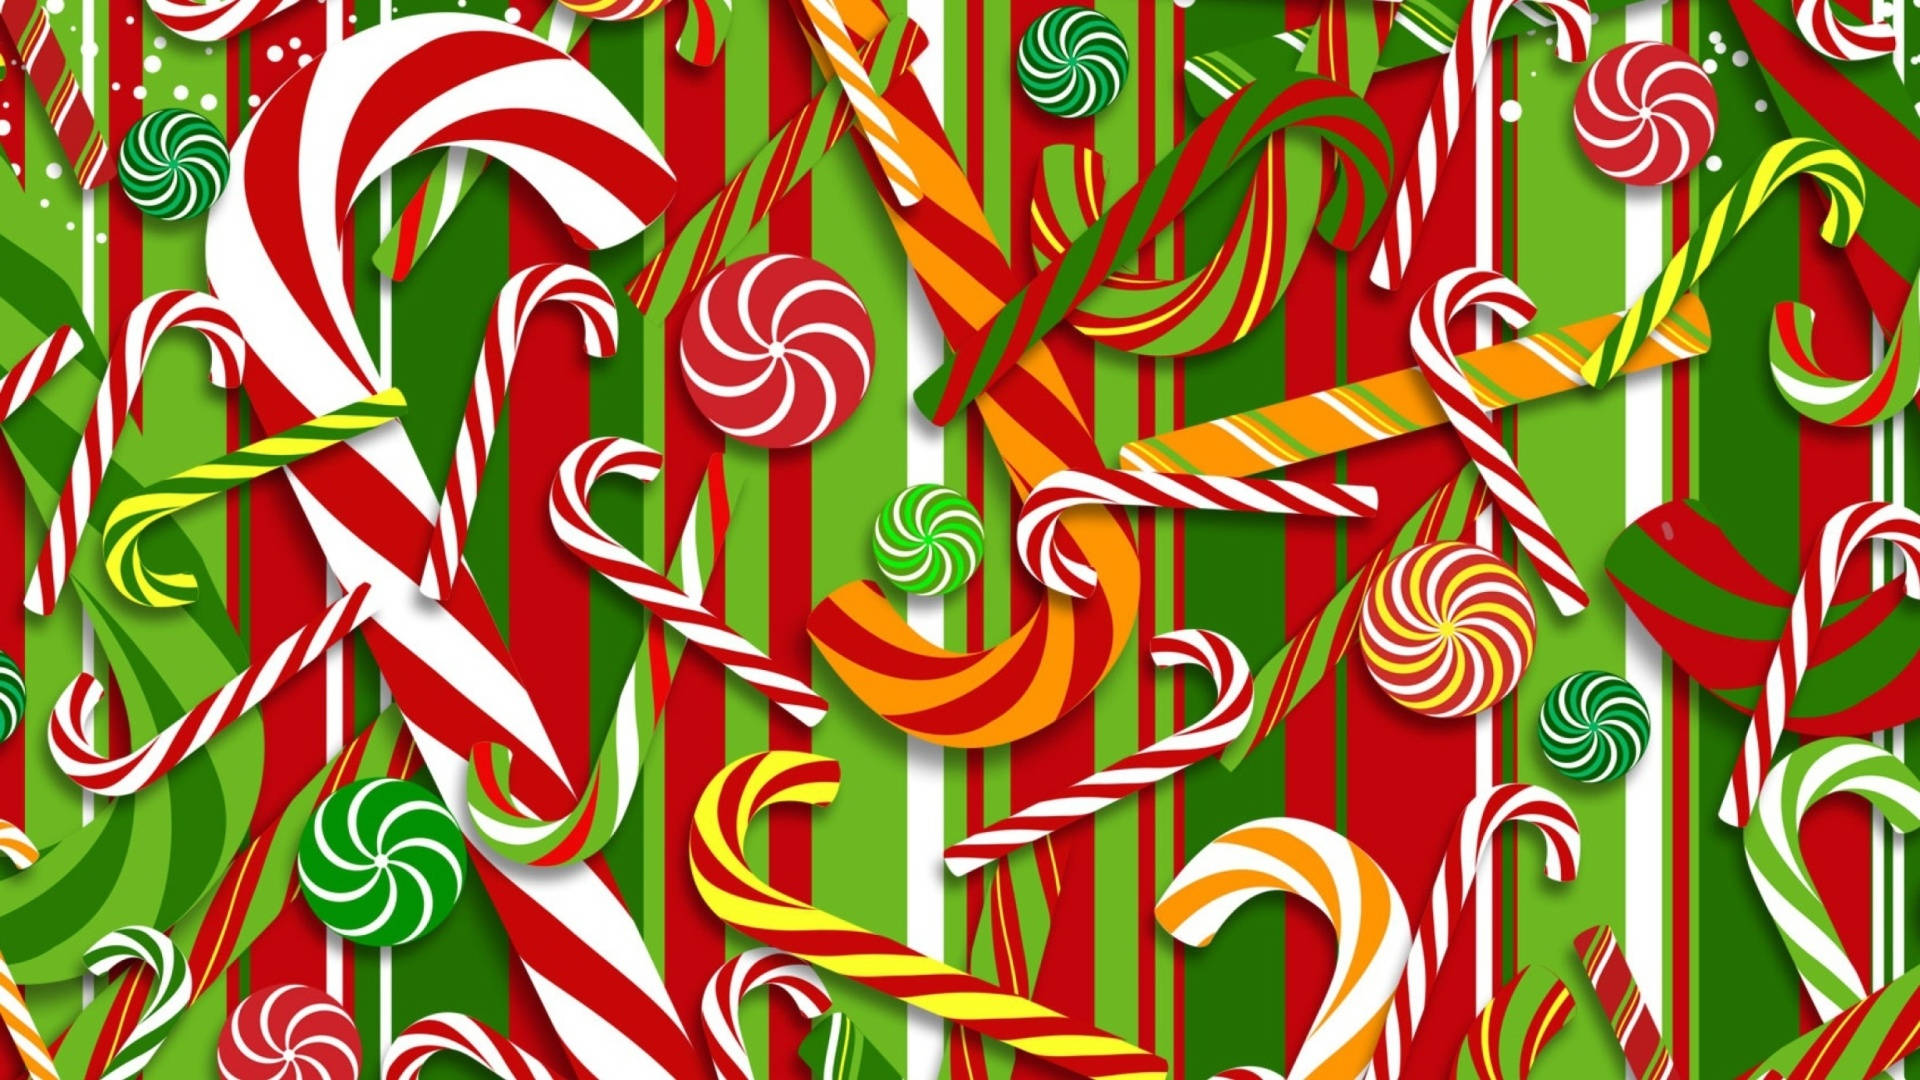 Free Candy Cane Wallpaper Downloads, [100+] Candy Cane Wallpapers for FREE  